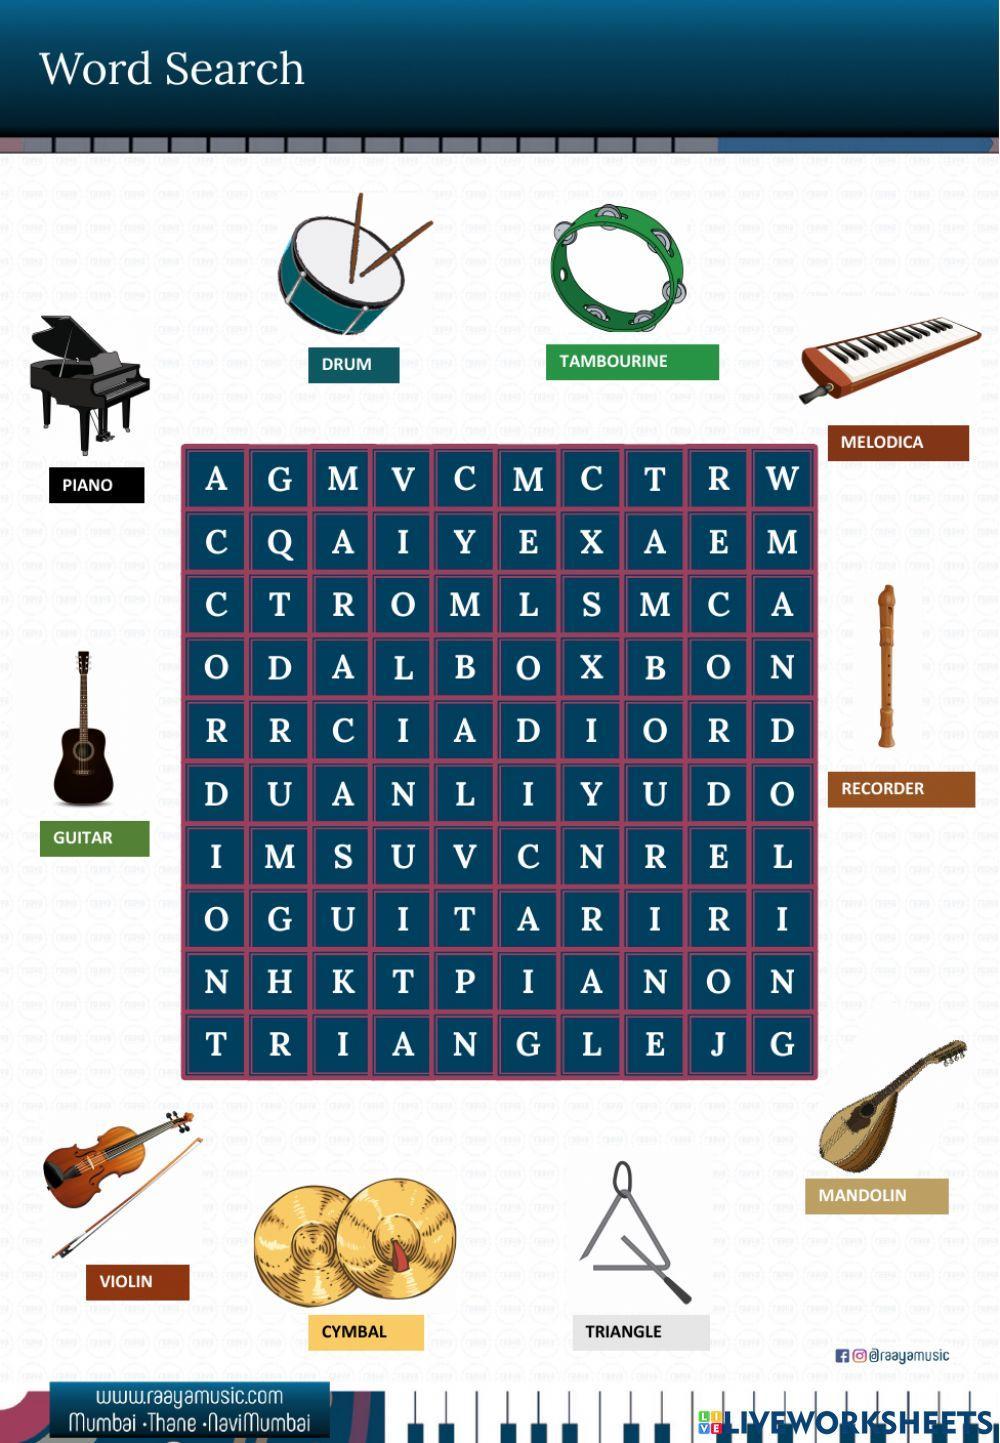 Musical Instruments - Word Search